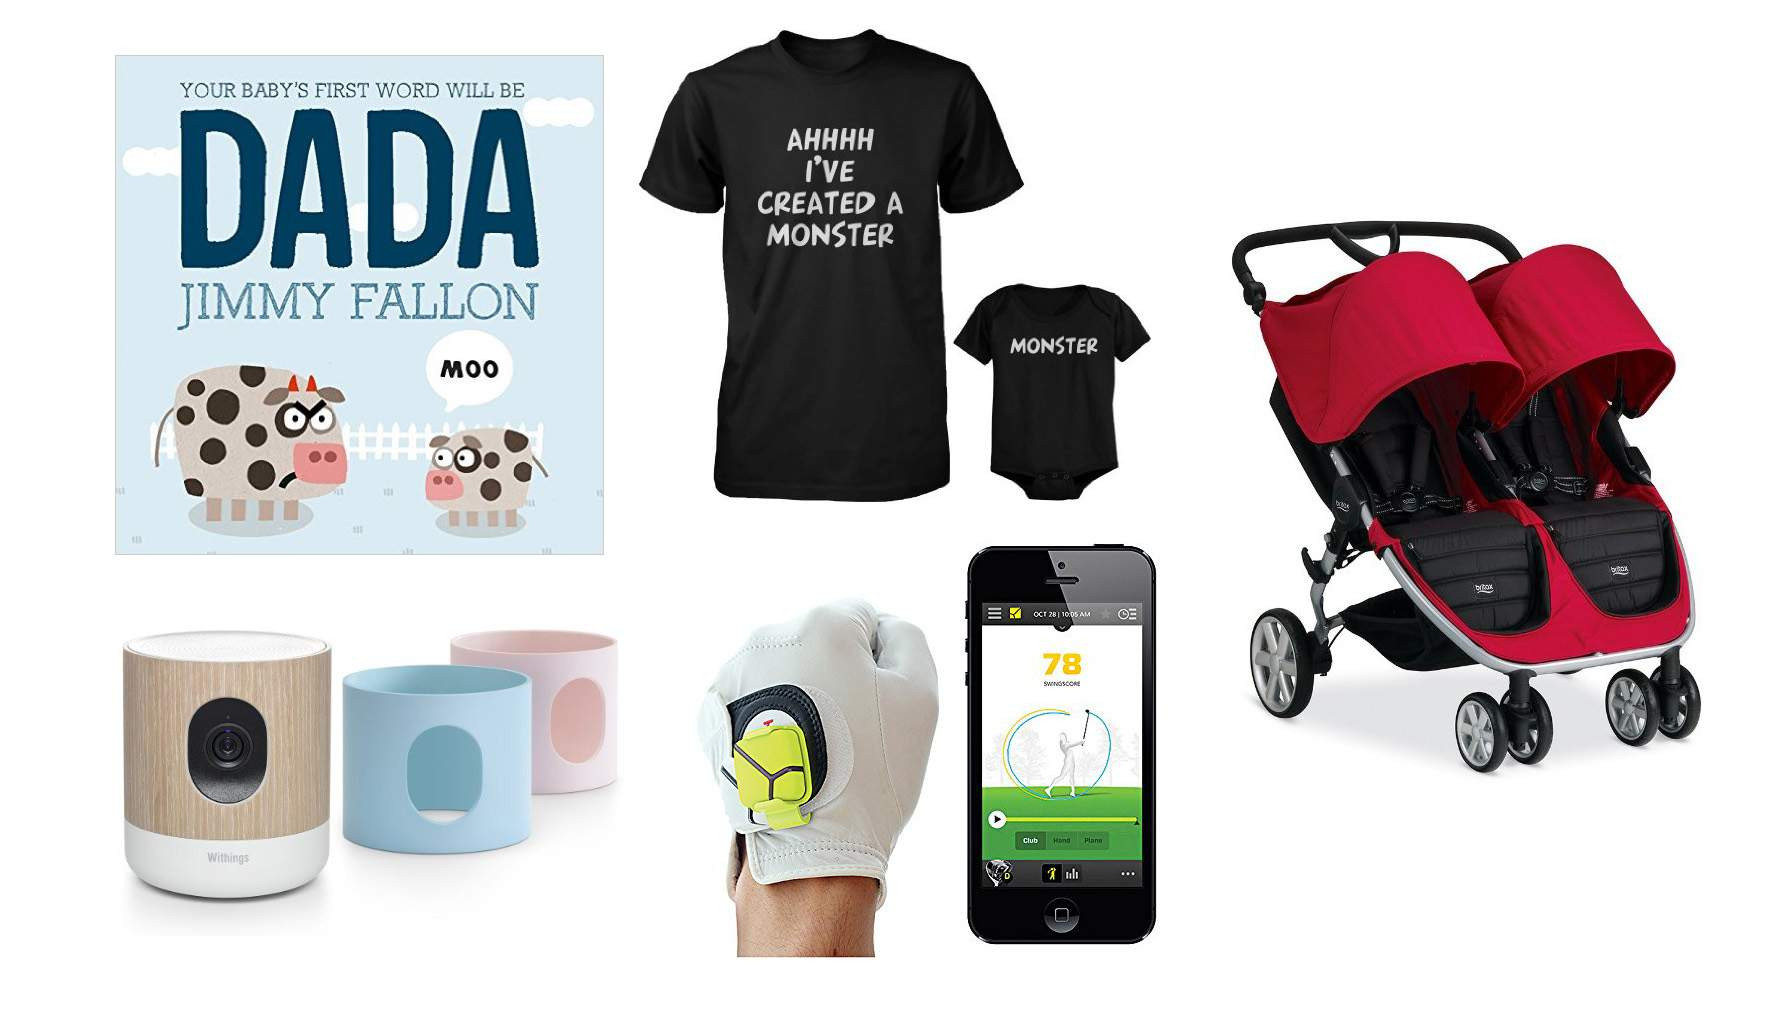 Fathers Day Gift Ideas For New Dads
 Top 10 Best Father’s Day Gifts for New Dads